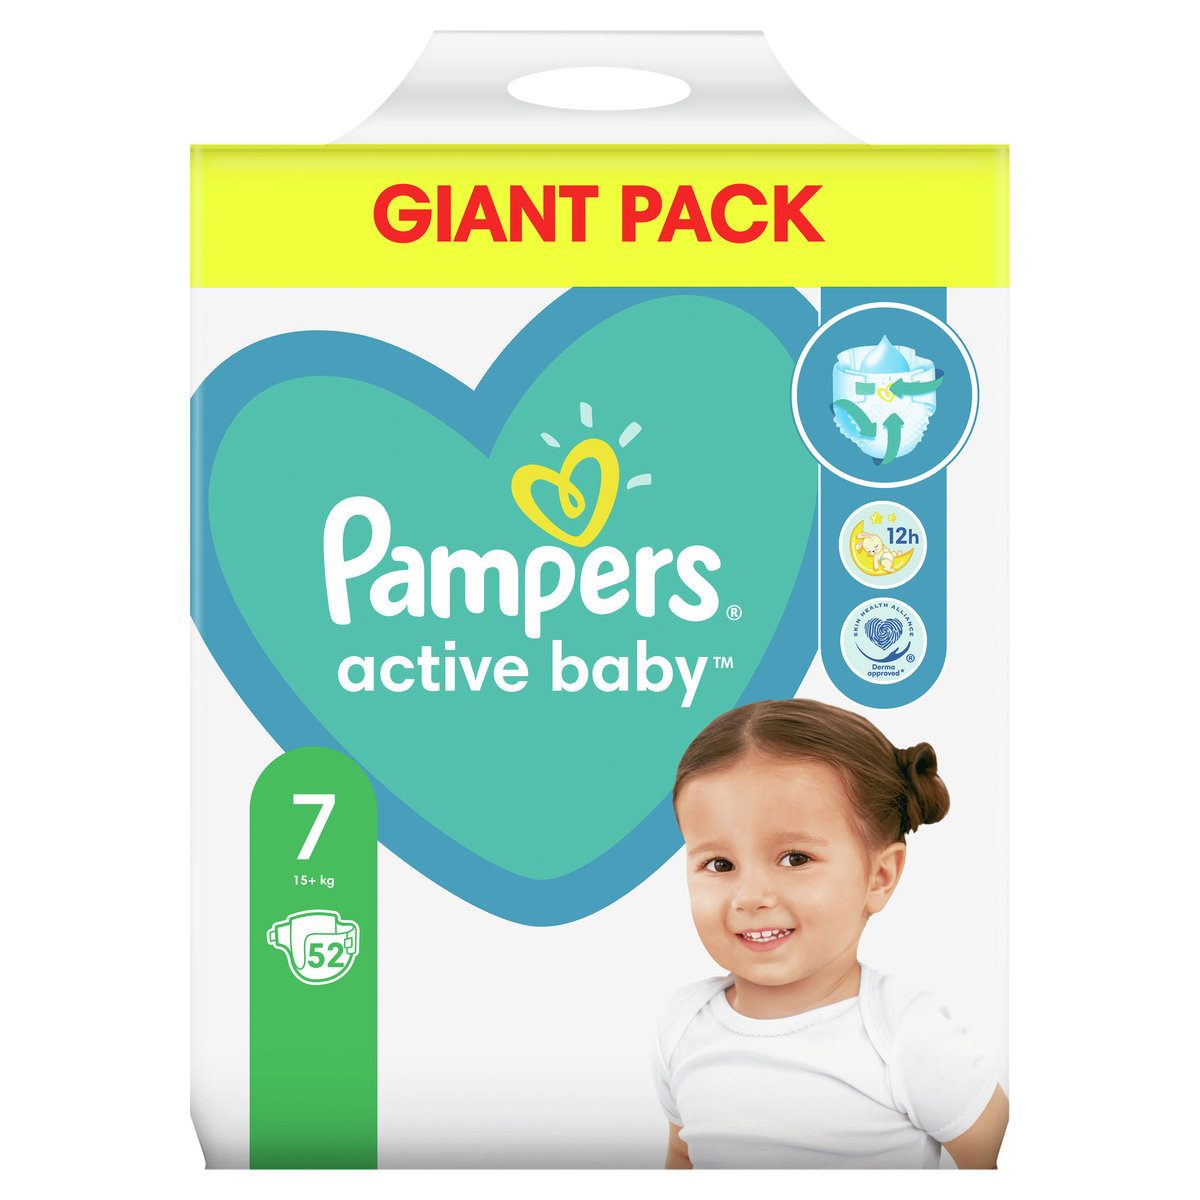 pampers night 6